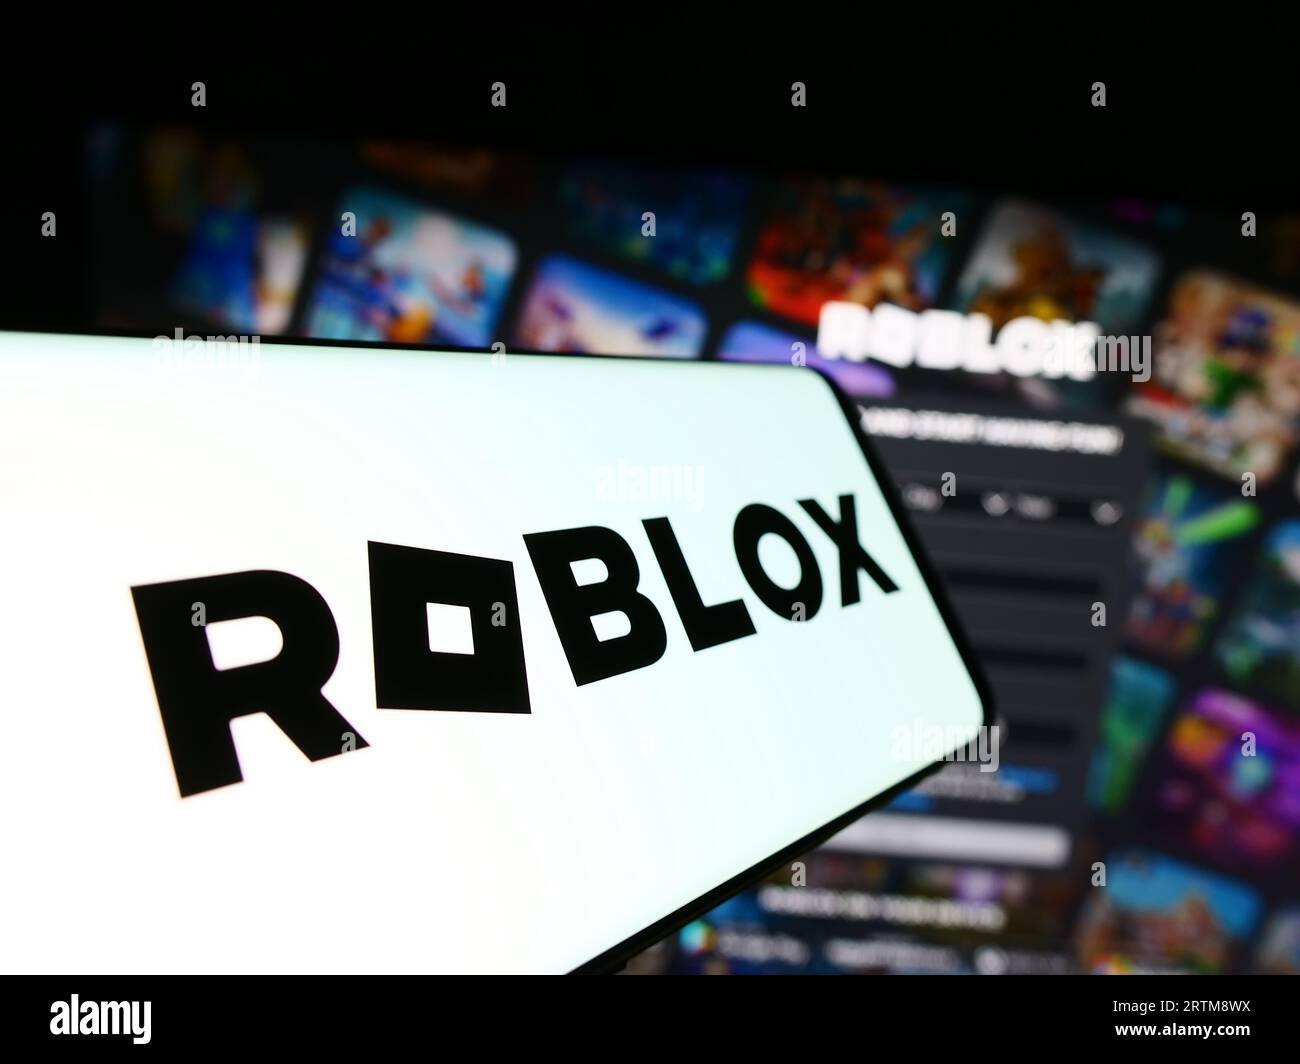 Cellphone with logo of American video games company Roblox Corporation on screen in front of website. Focus on center-left of phone display. Stock Photo